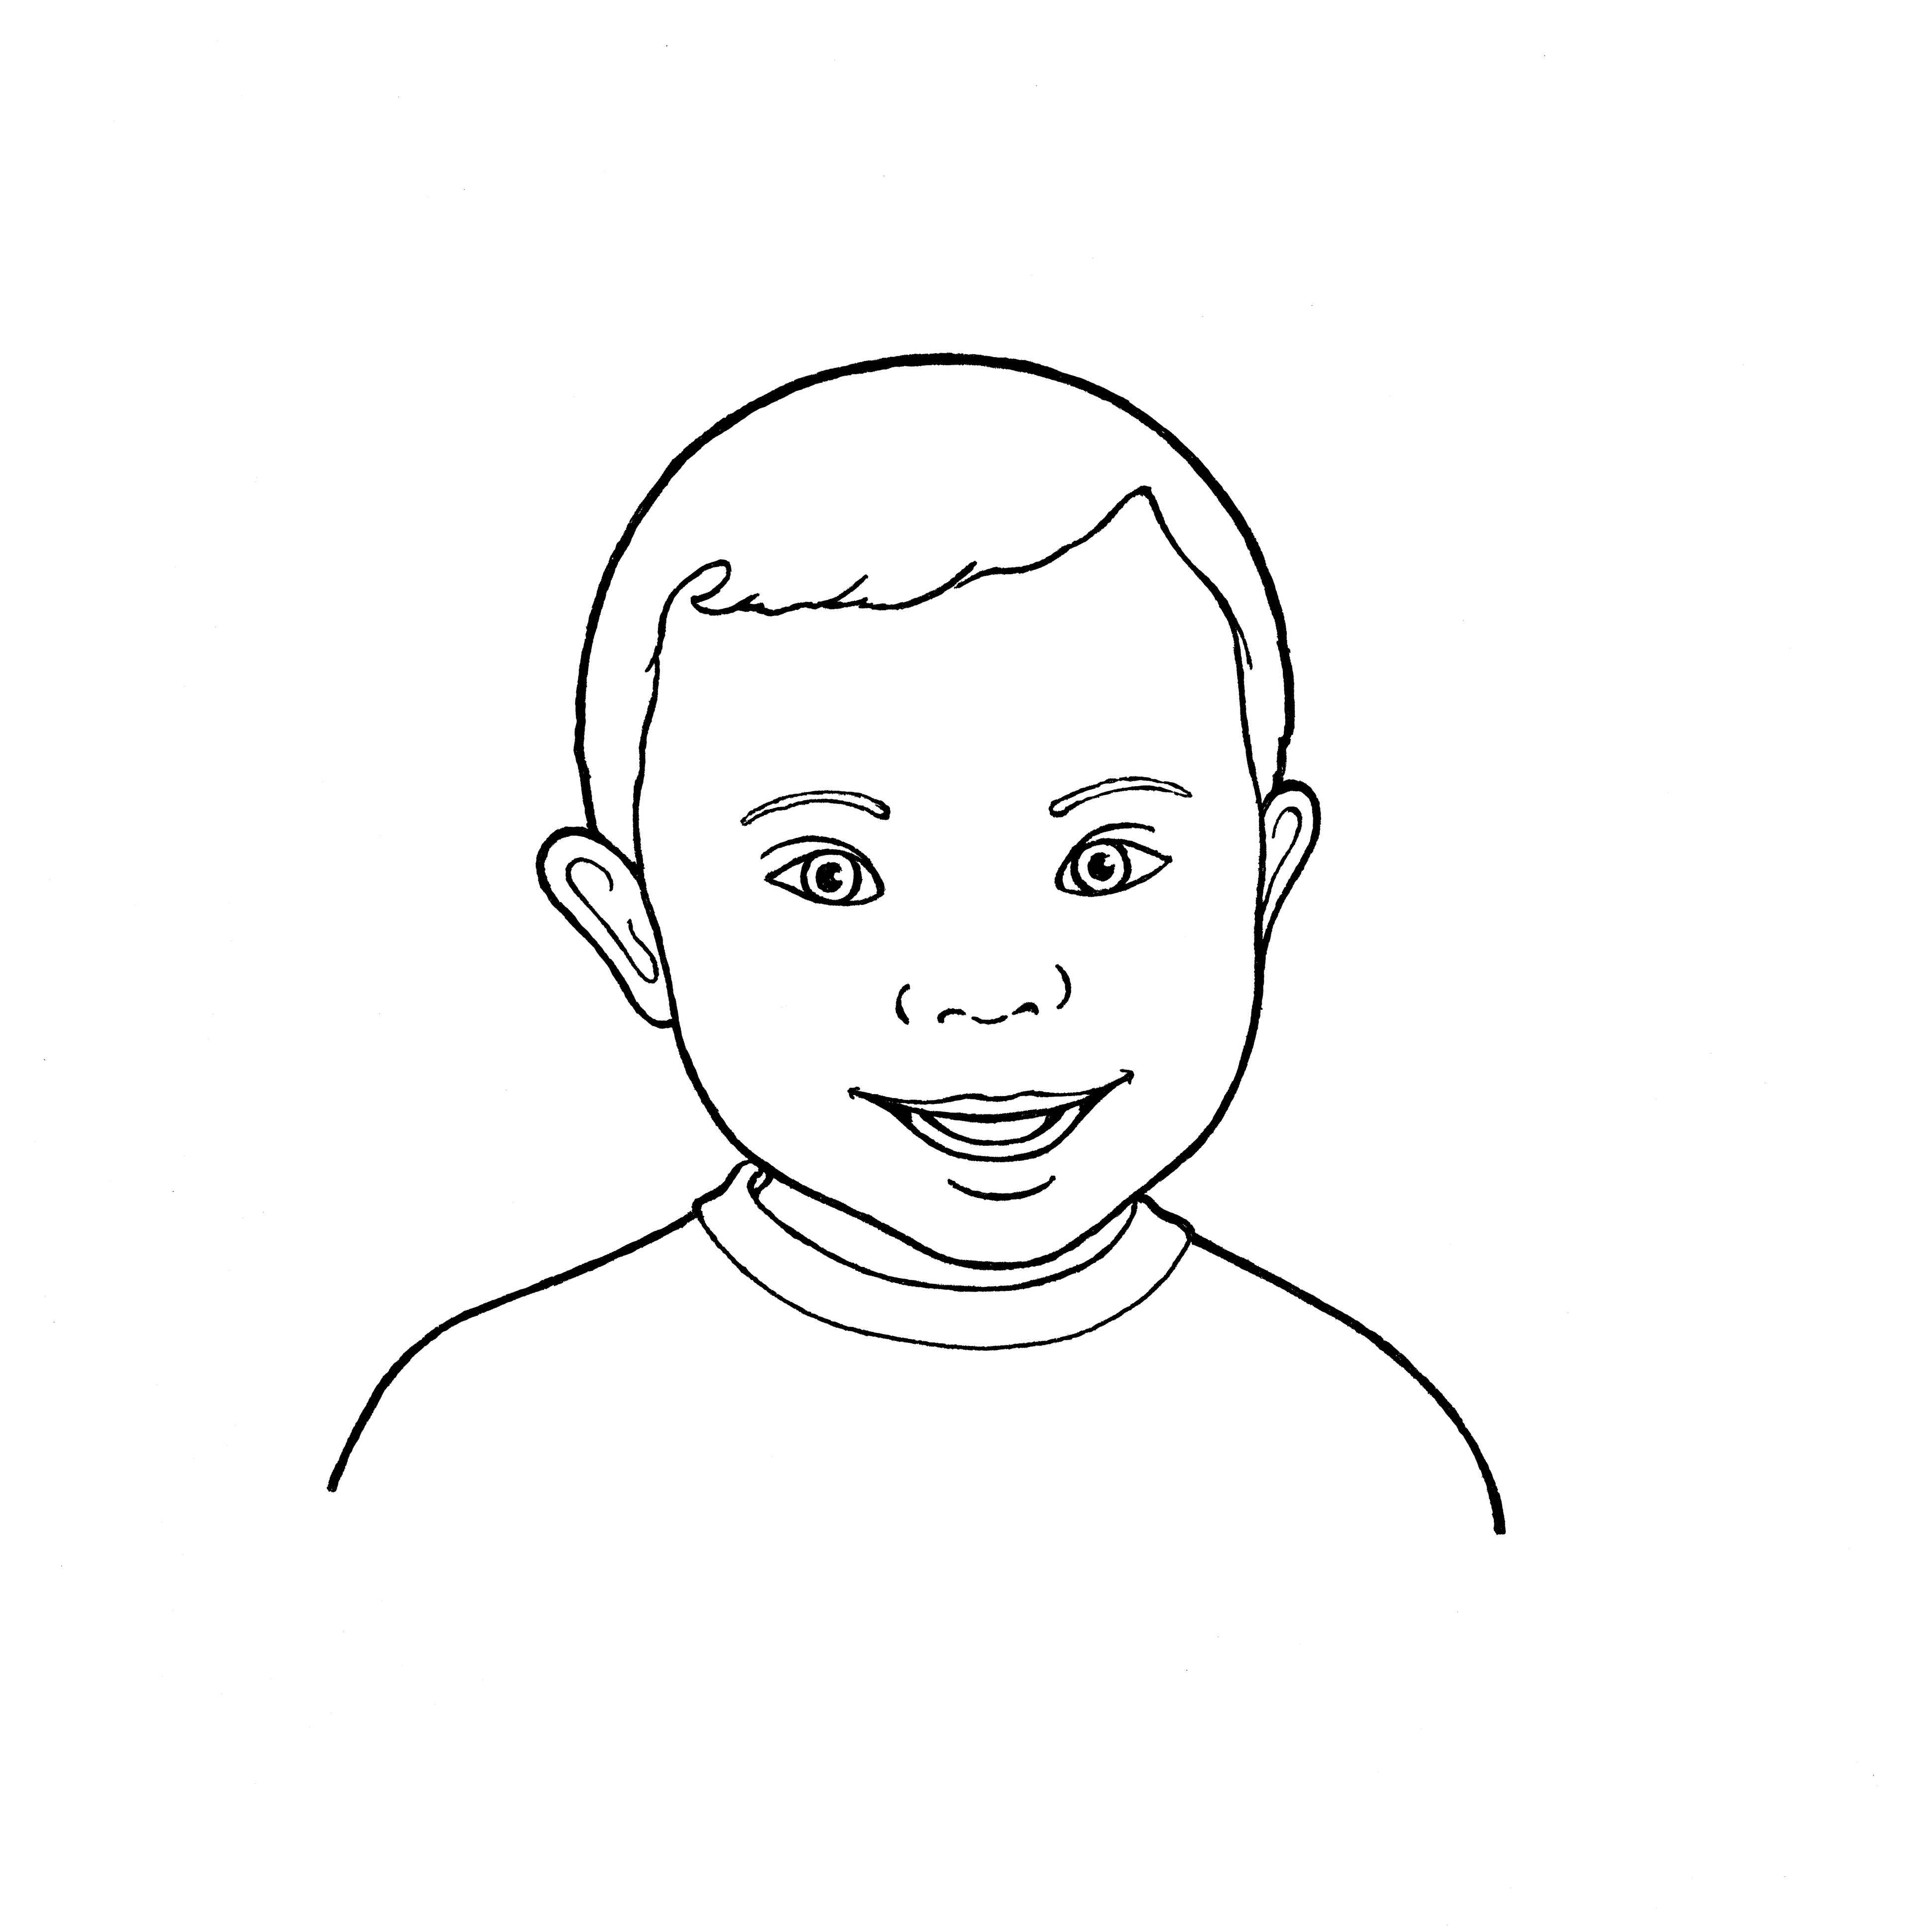 An illustration of a child with Down Syndrome.